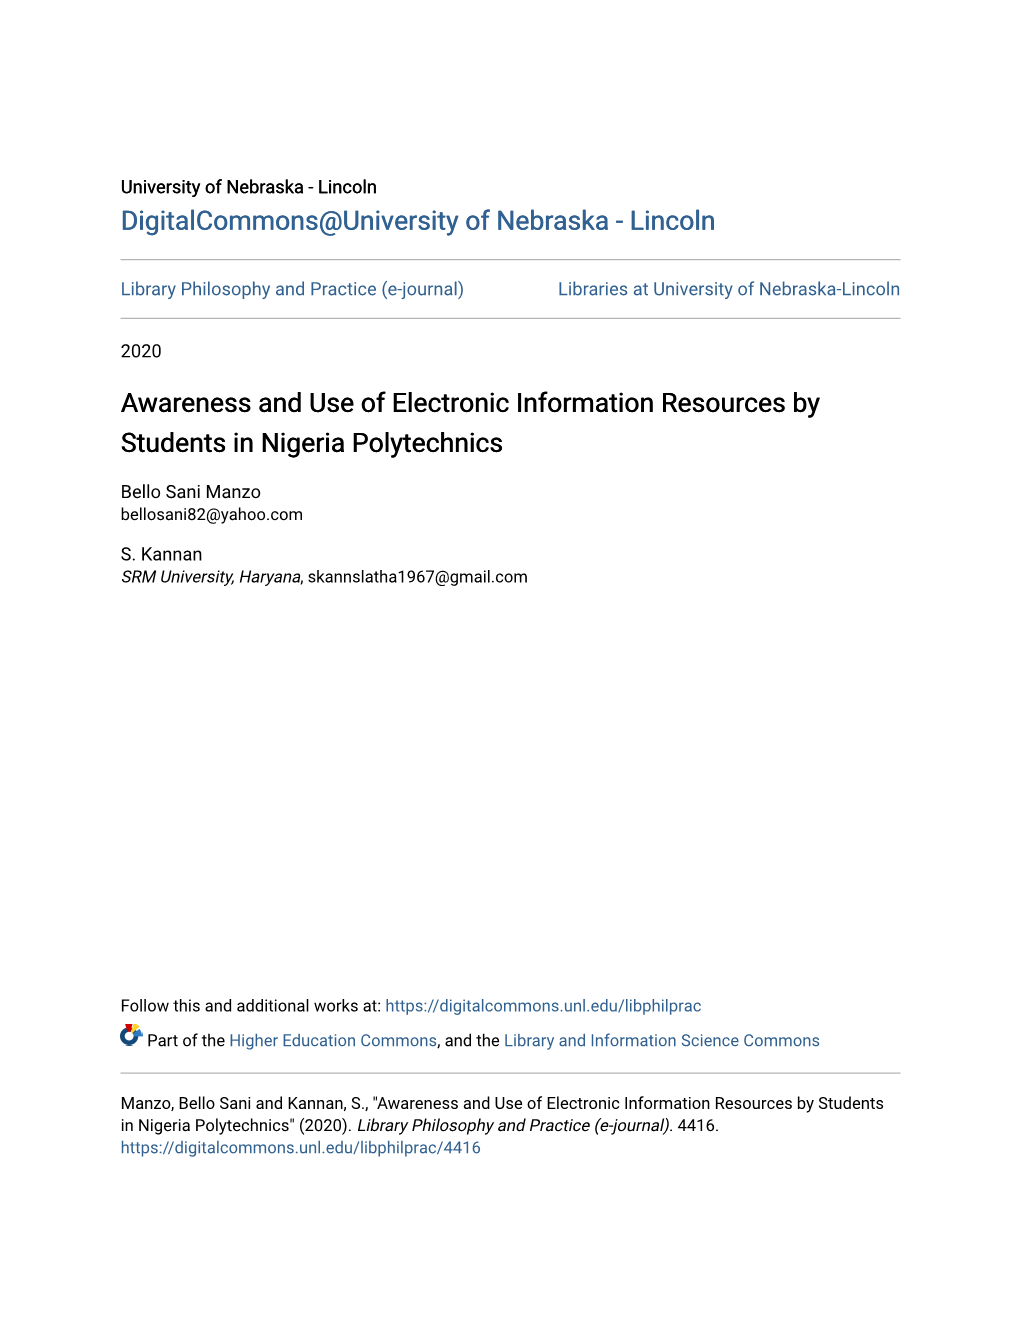 Awareness and Use of Electronic Information Resources by Students in Nigeria Polytechnics